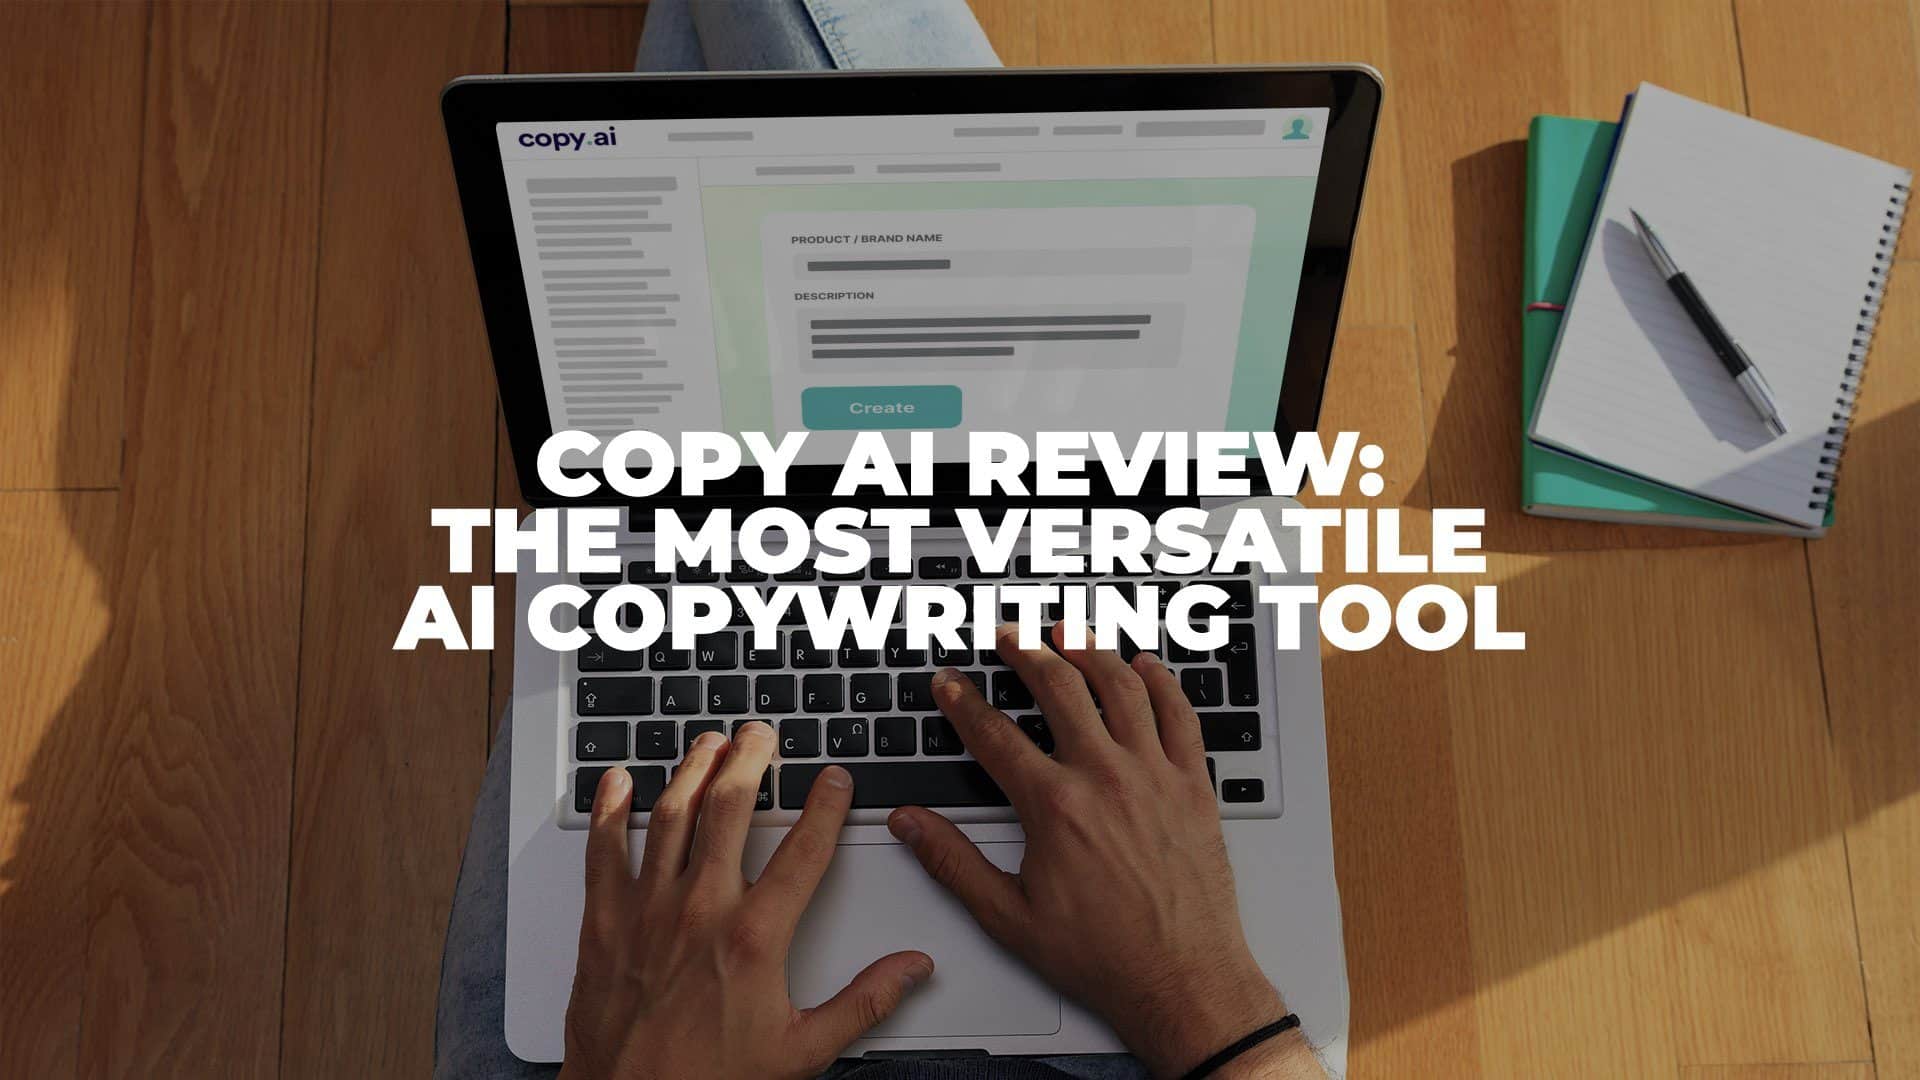 Copy AI Review - Featured Image